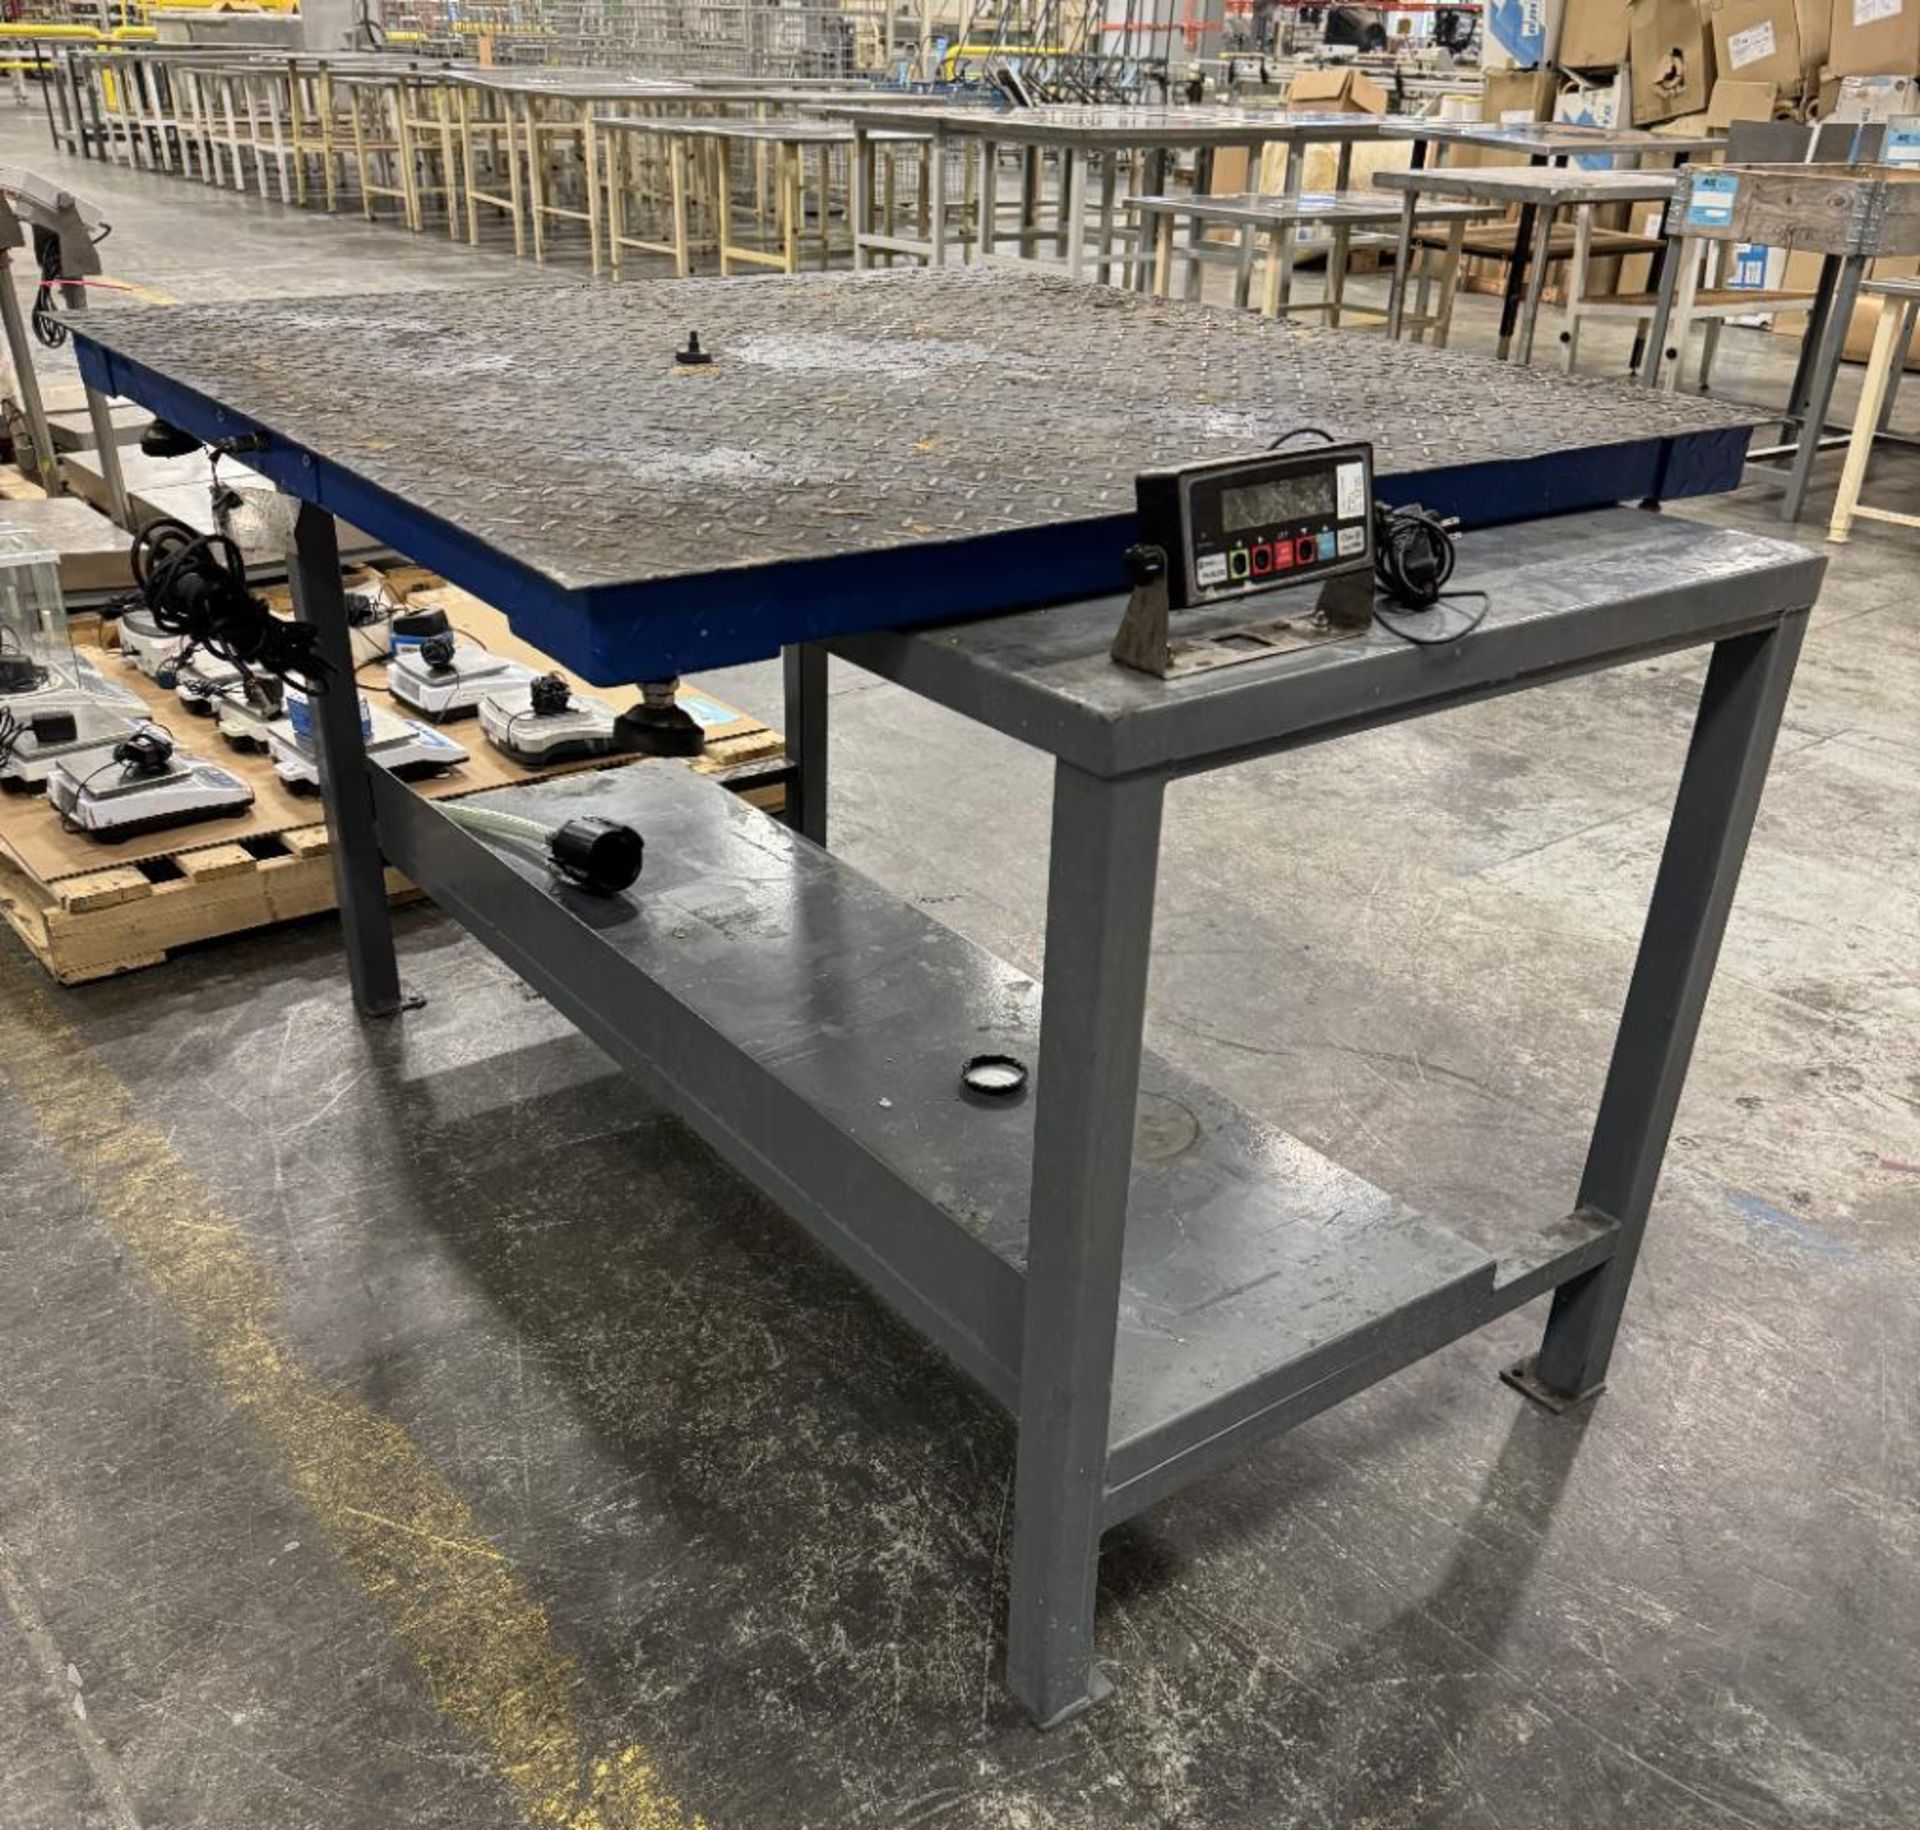 Lot Consisting Of: (1) Prime Scale 48" x 48" Floor Scale with controller, (1) Uline steel work table - Image 5 of 5